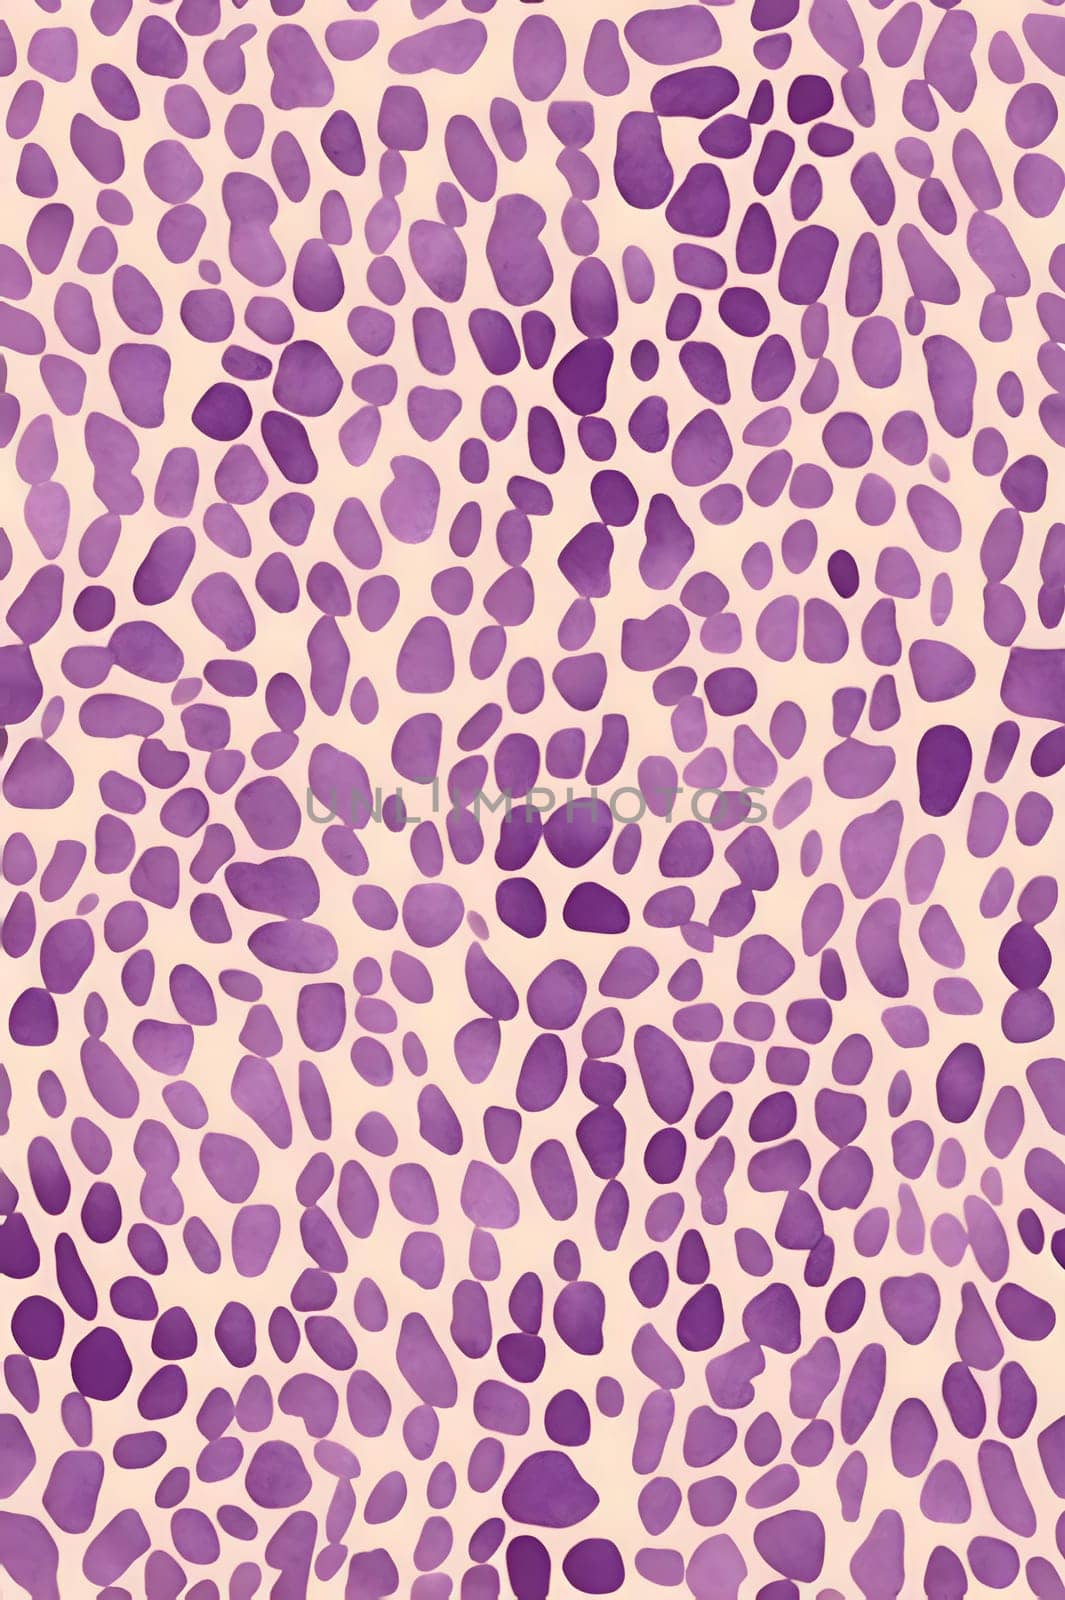 Patterns and banners backgrounds: Seamless pattern with watercolor leopard print. Vector illustration.